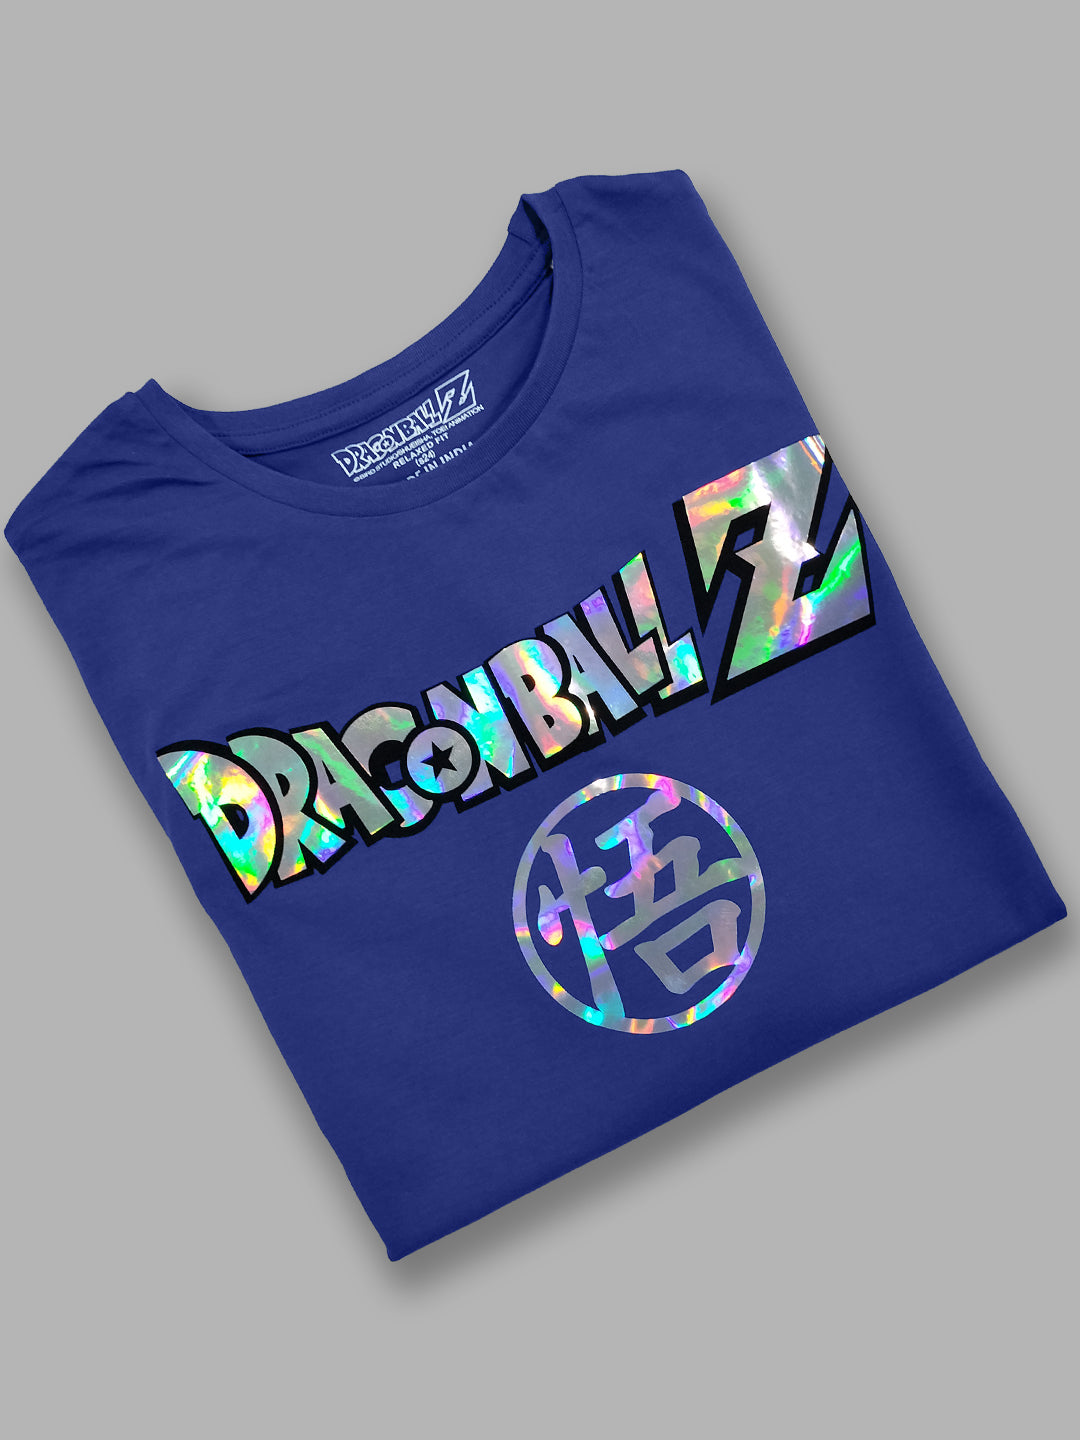 Free Authority Dragon Ball Z Printed Relaxed Fit Tshirt For Women